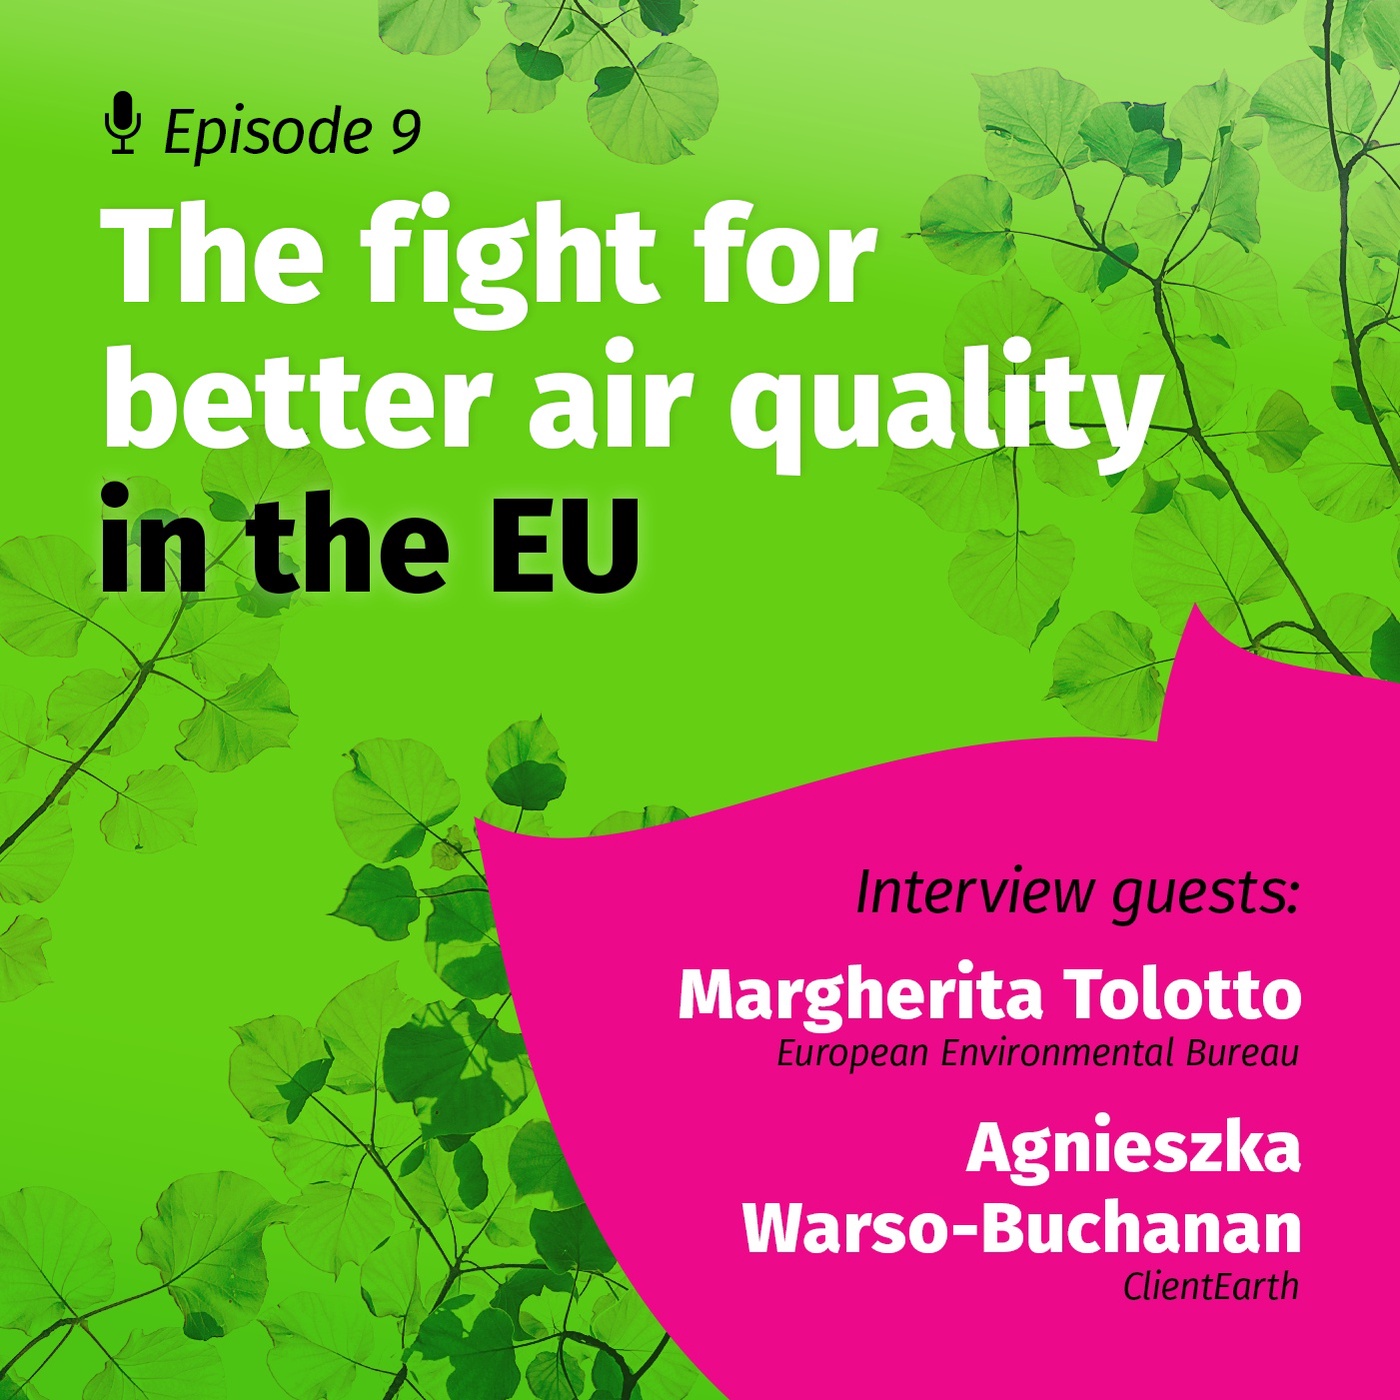 The fight for better air quality in the EU